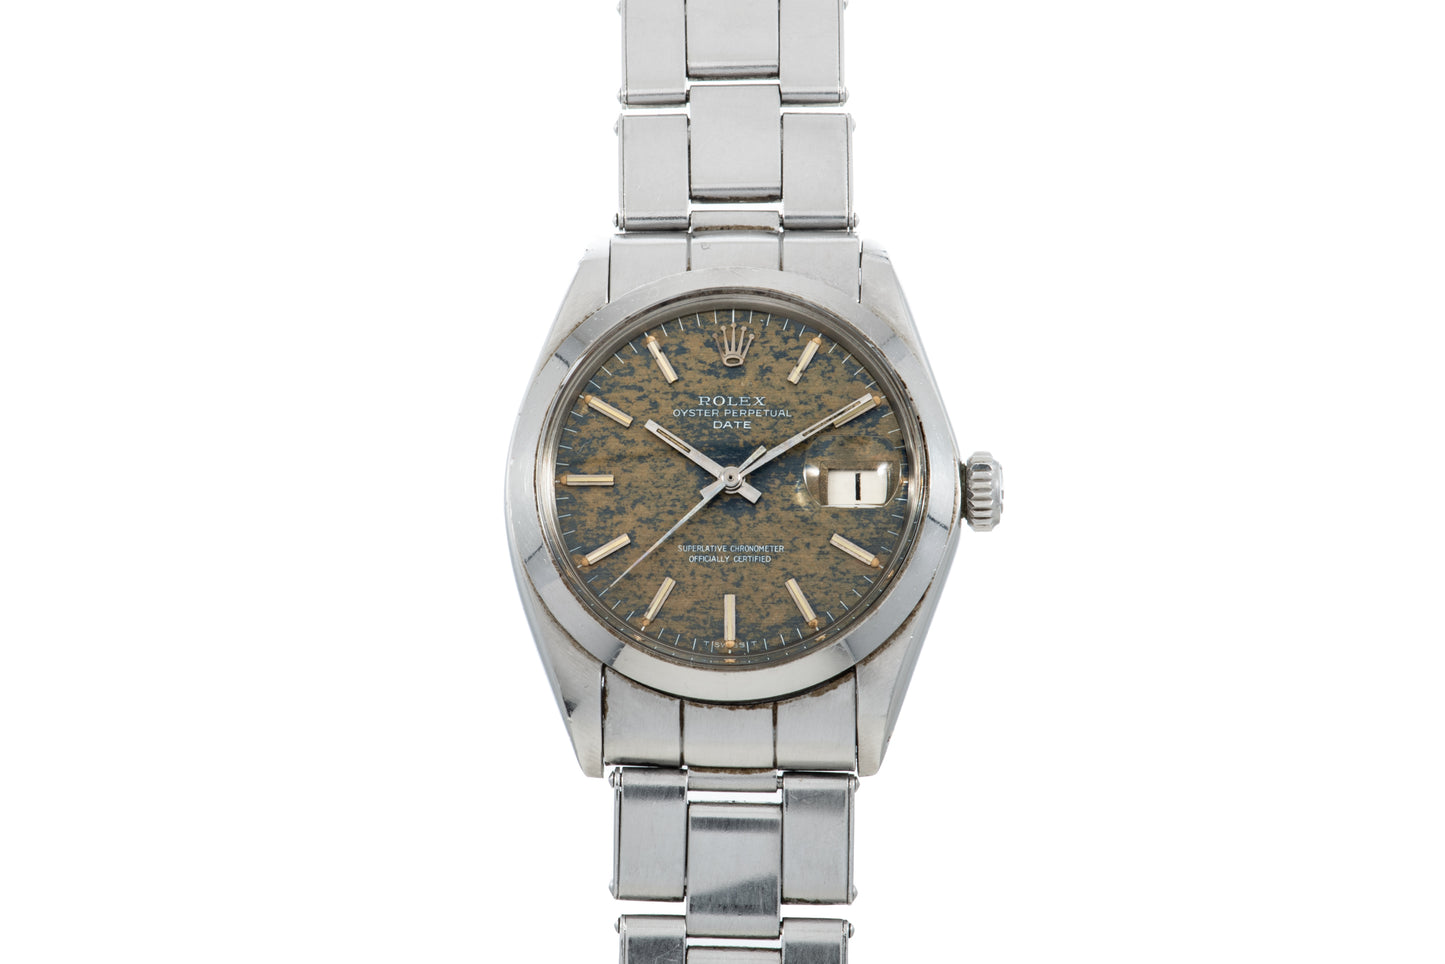 Rolex Oyster Perpetual Date 'Tropical'